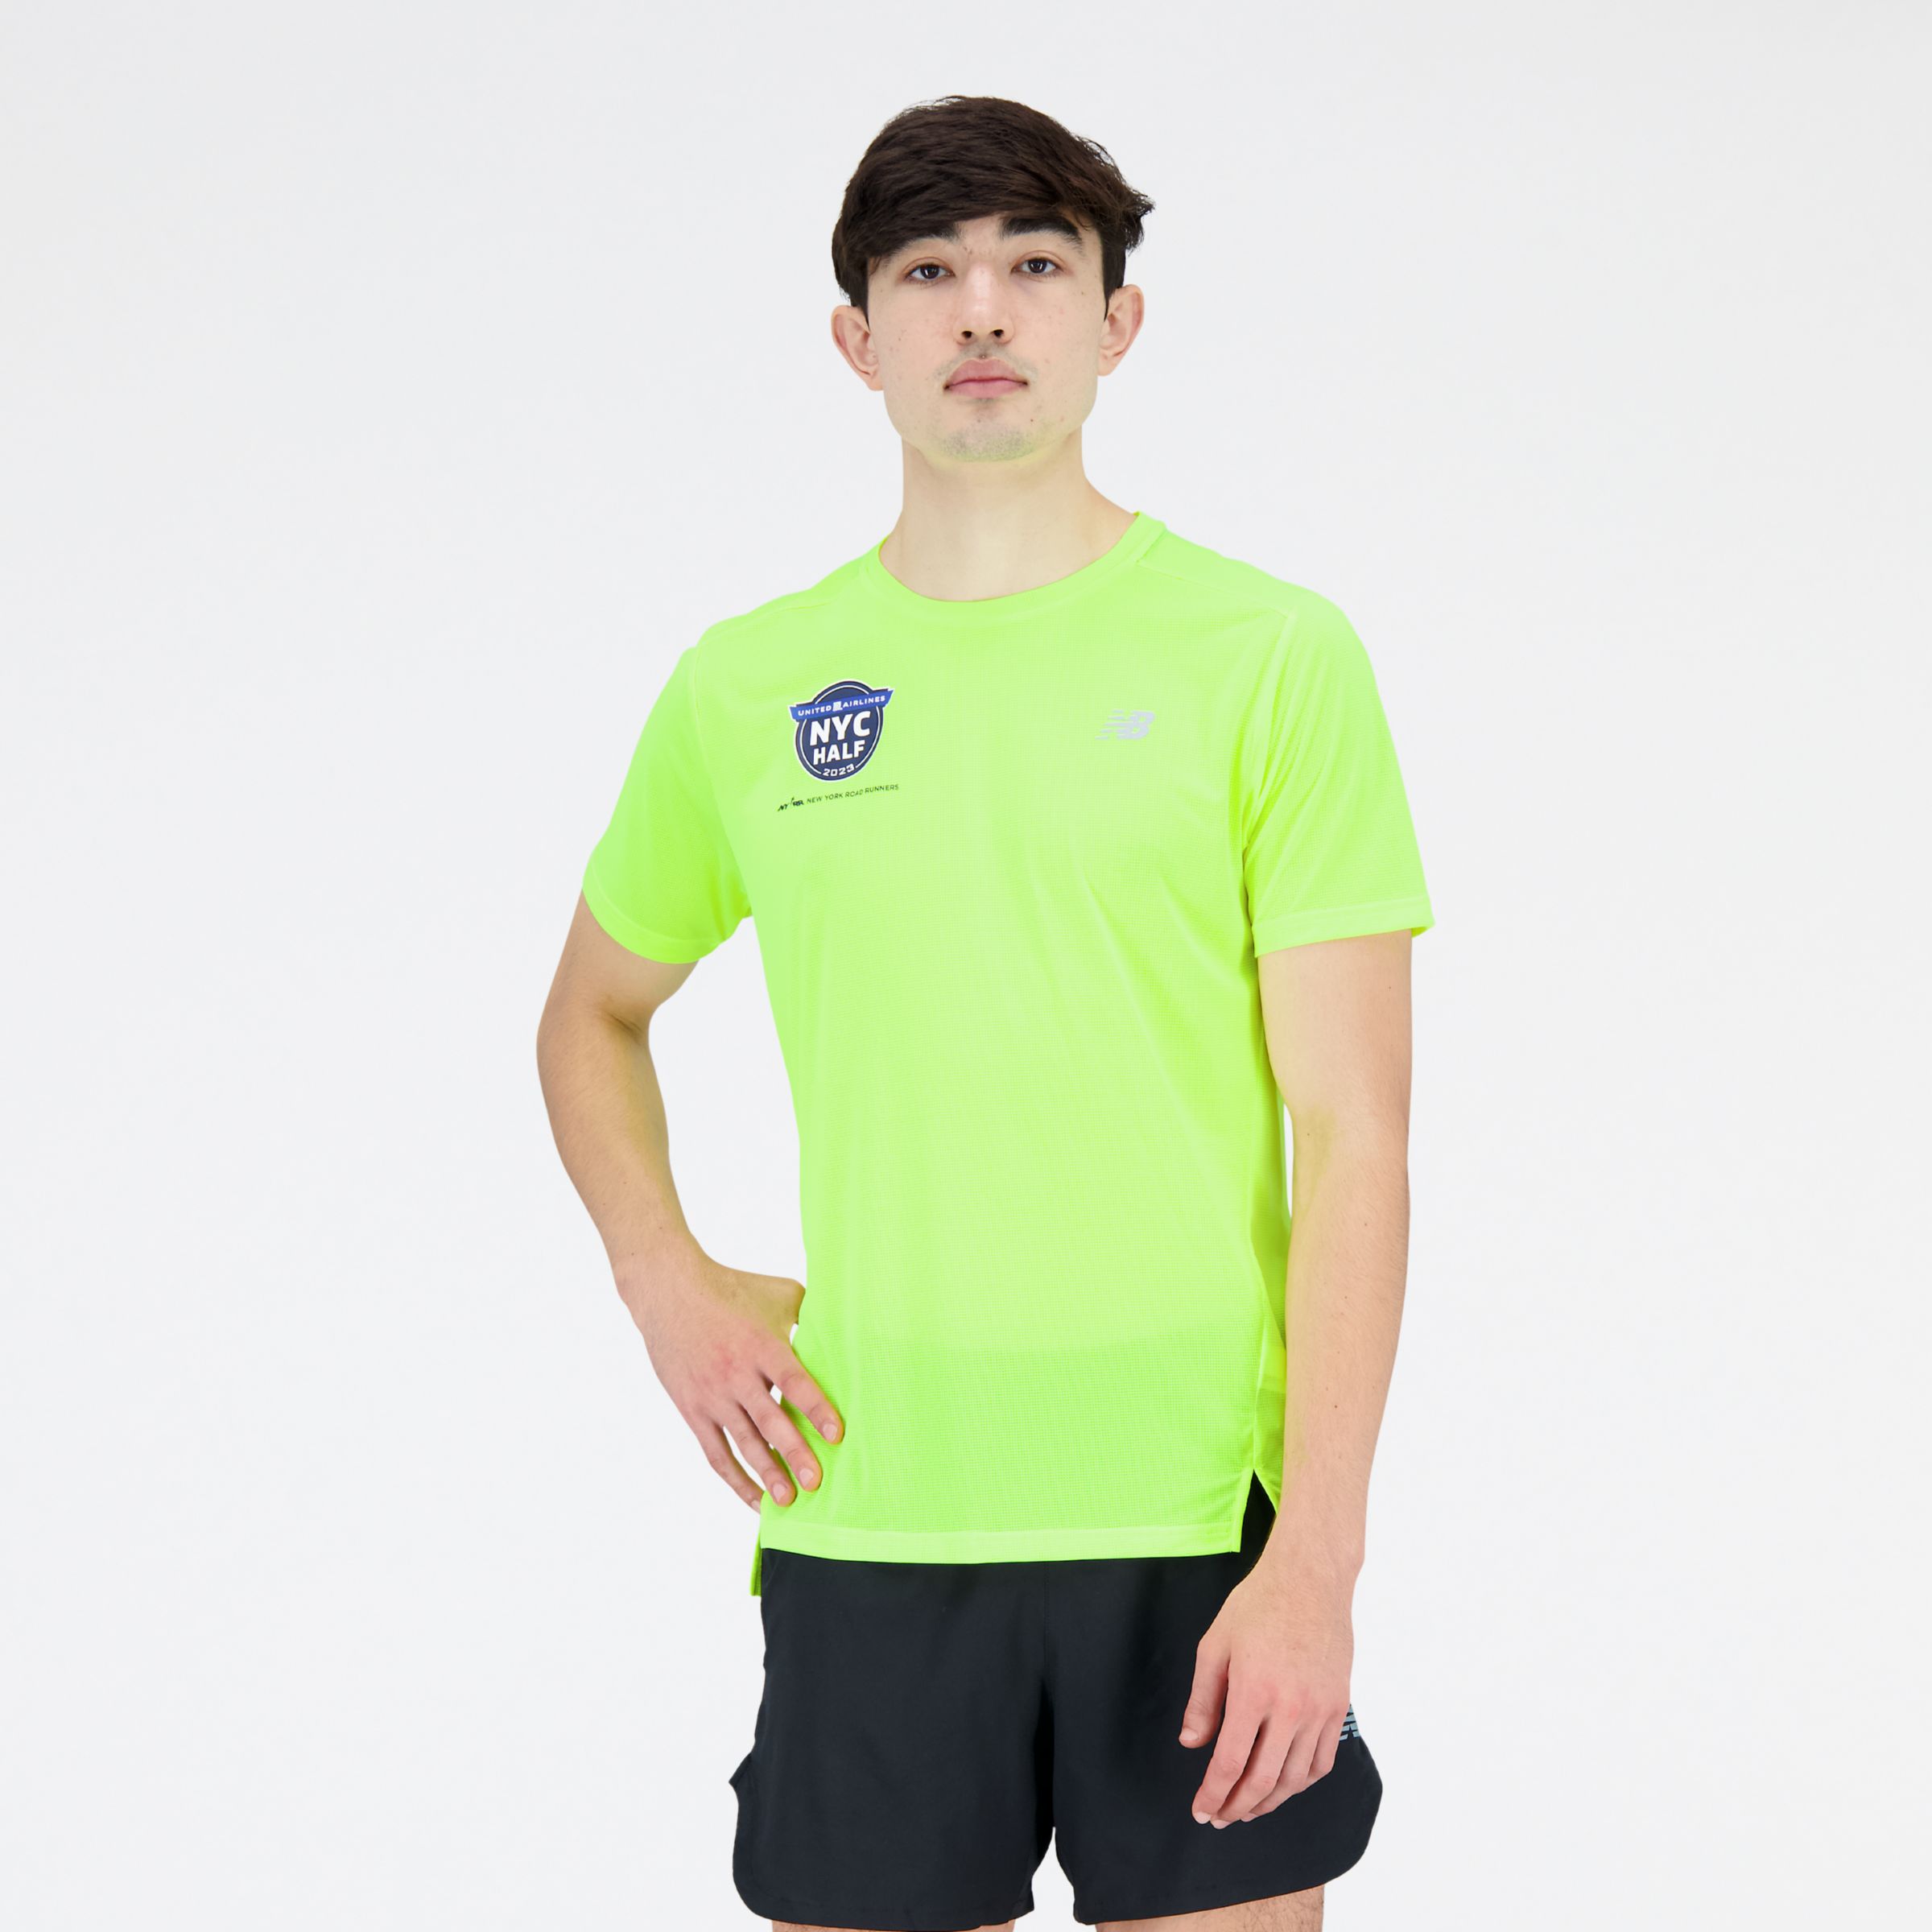 

New Balance Men's United Airlines NYC Half Training Accelerate Short Sleeve Yellow - Yellow